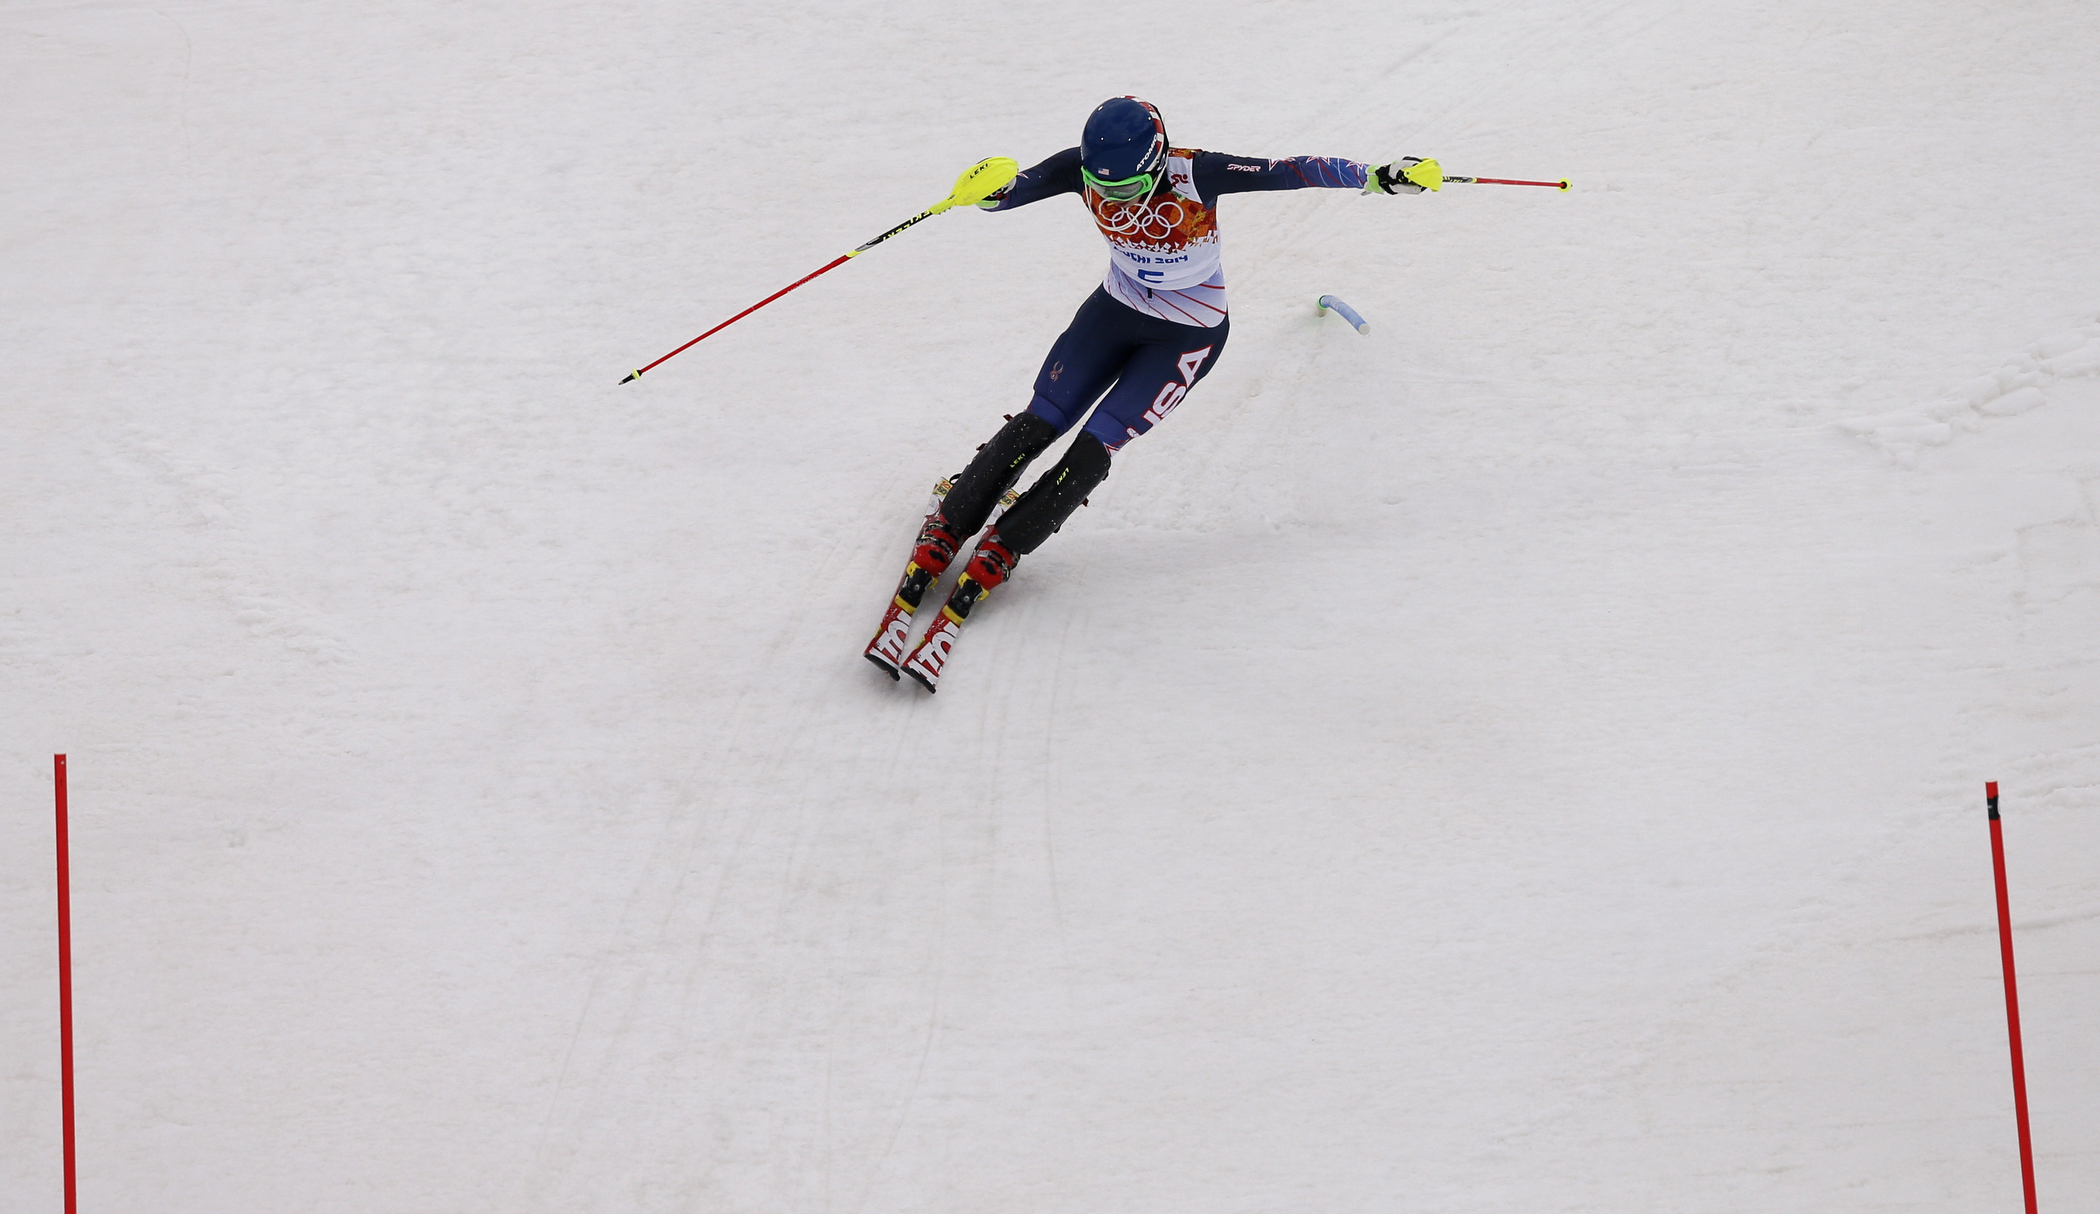 United States' Mikaela Shiffrin nears the finish in the first run of the women's slalom.